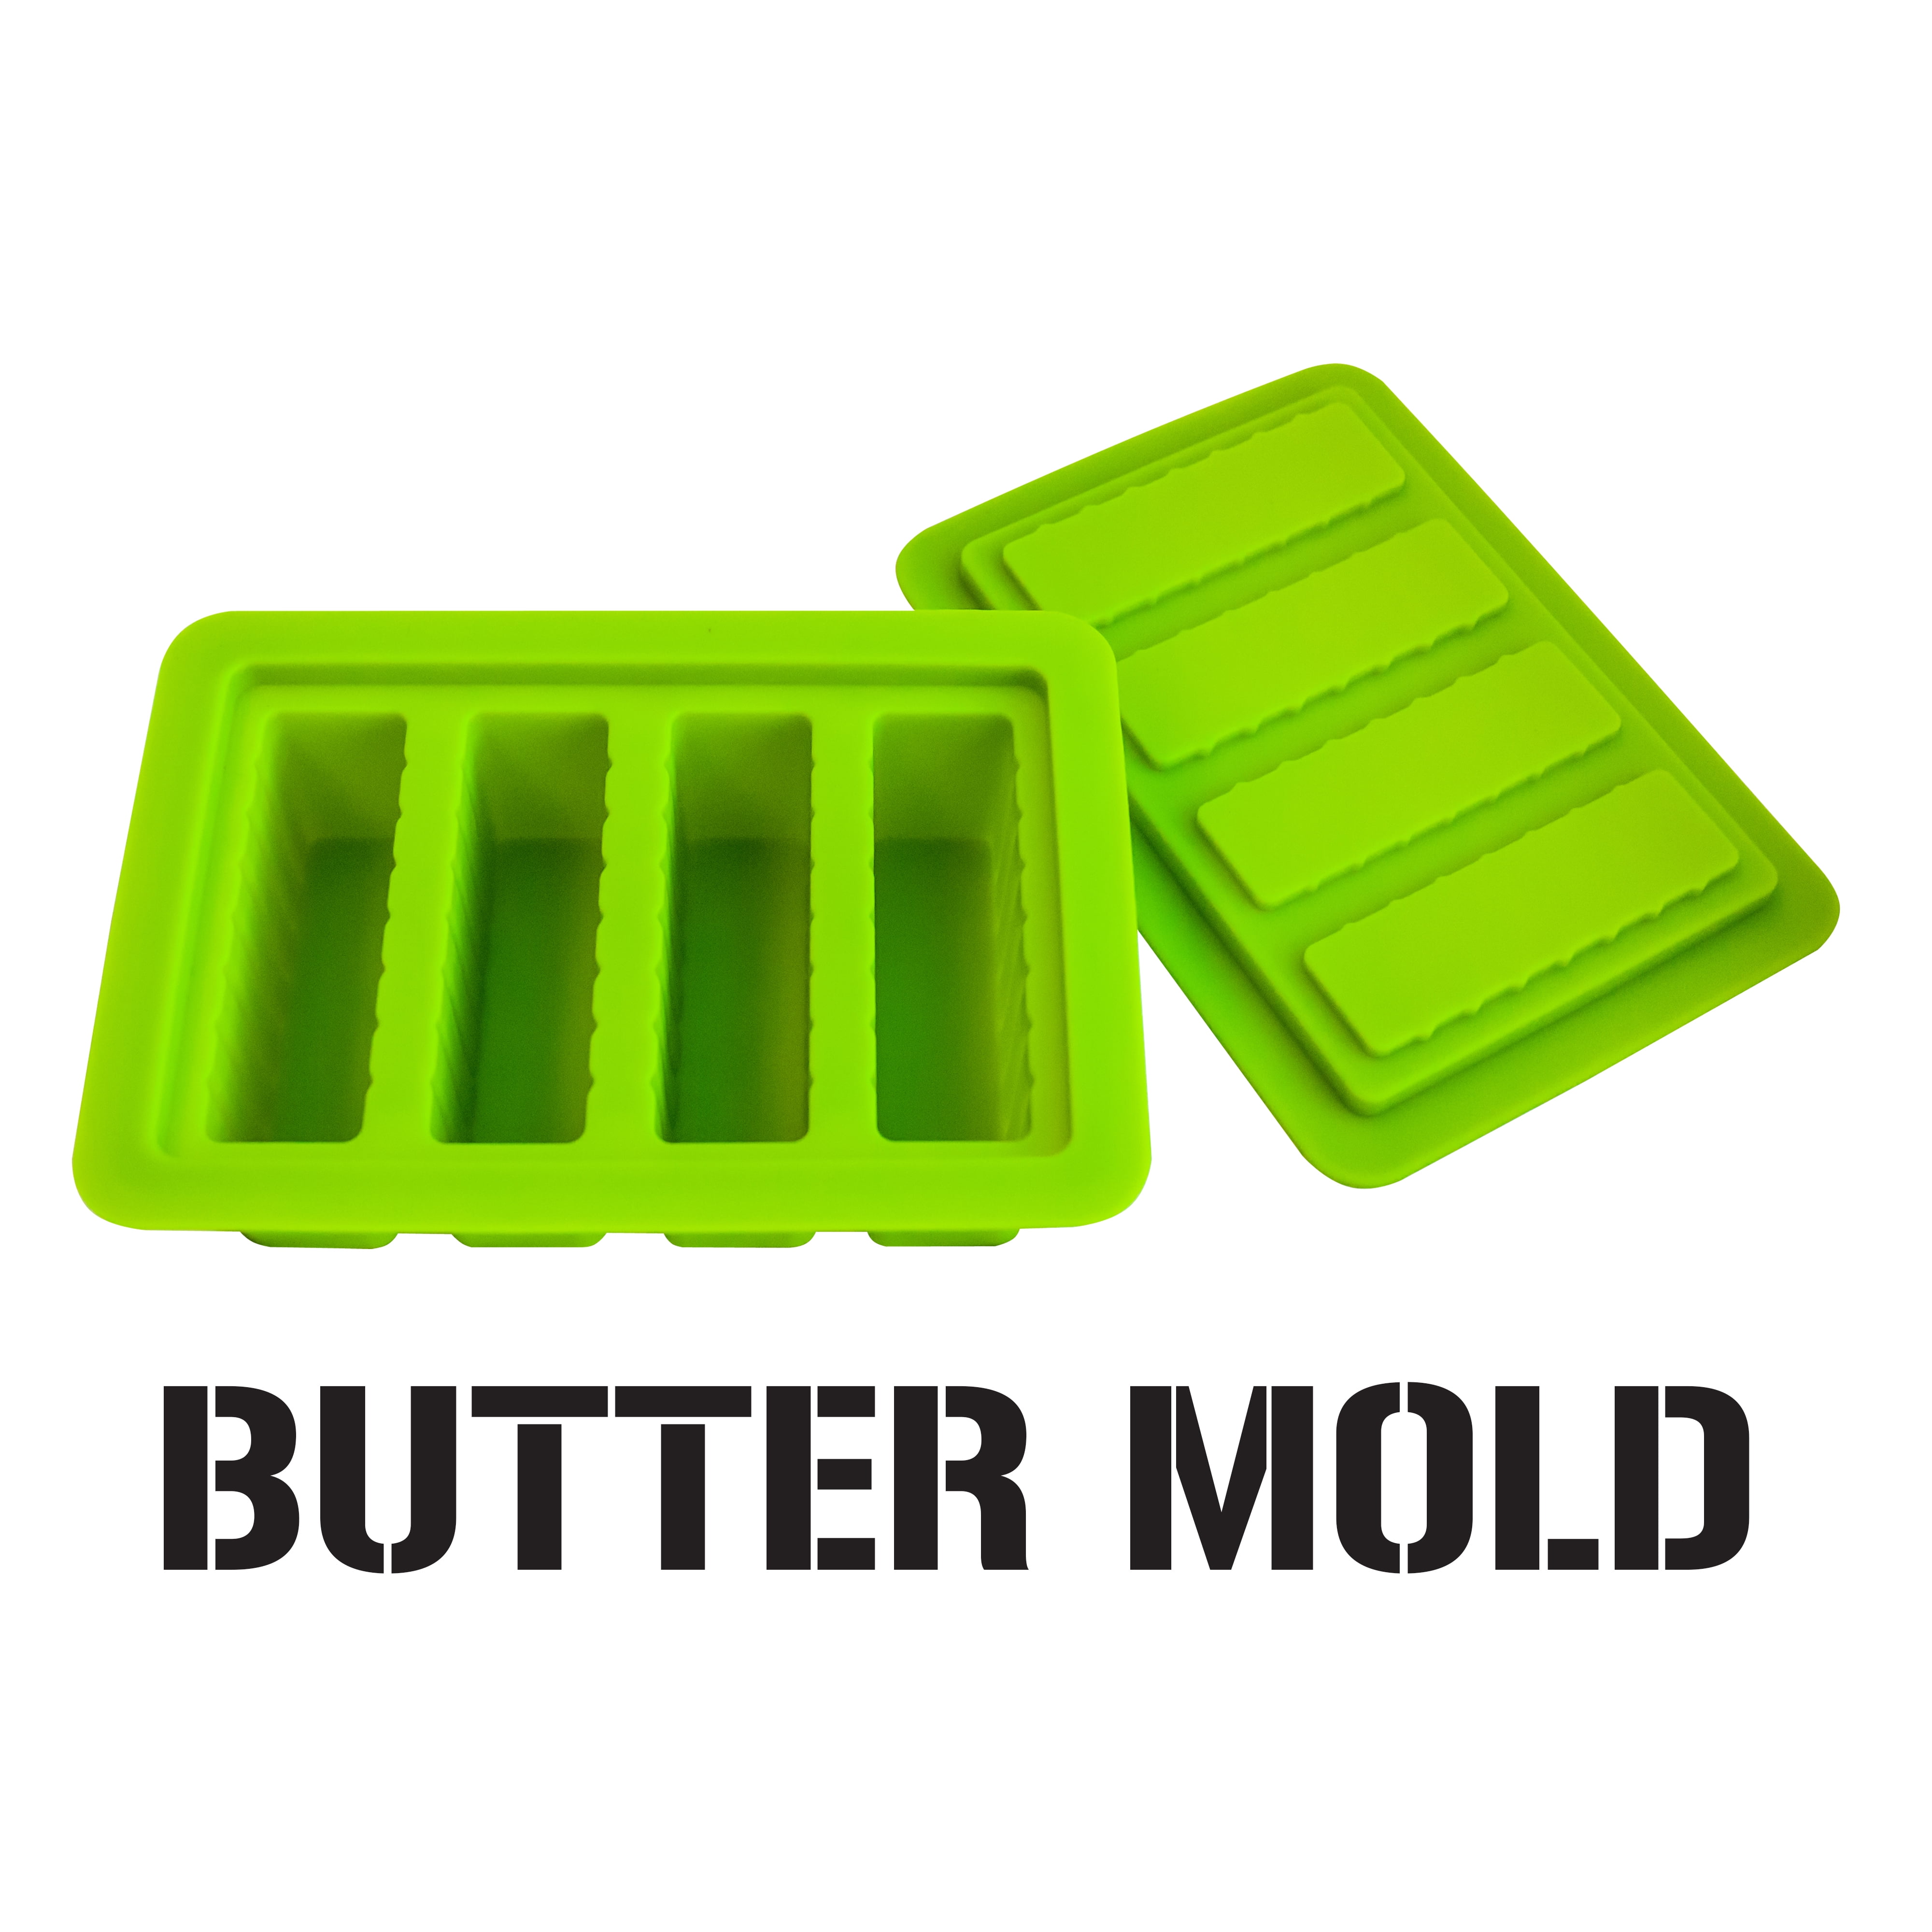 Veradant Butter Mold Tray with Lid Storage - The Silicone Butter Molds with  4 Large Storage Cavities for Butter, Brownies, Ice, Soap Bars, Energy Bars  and Chocolates